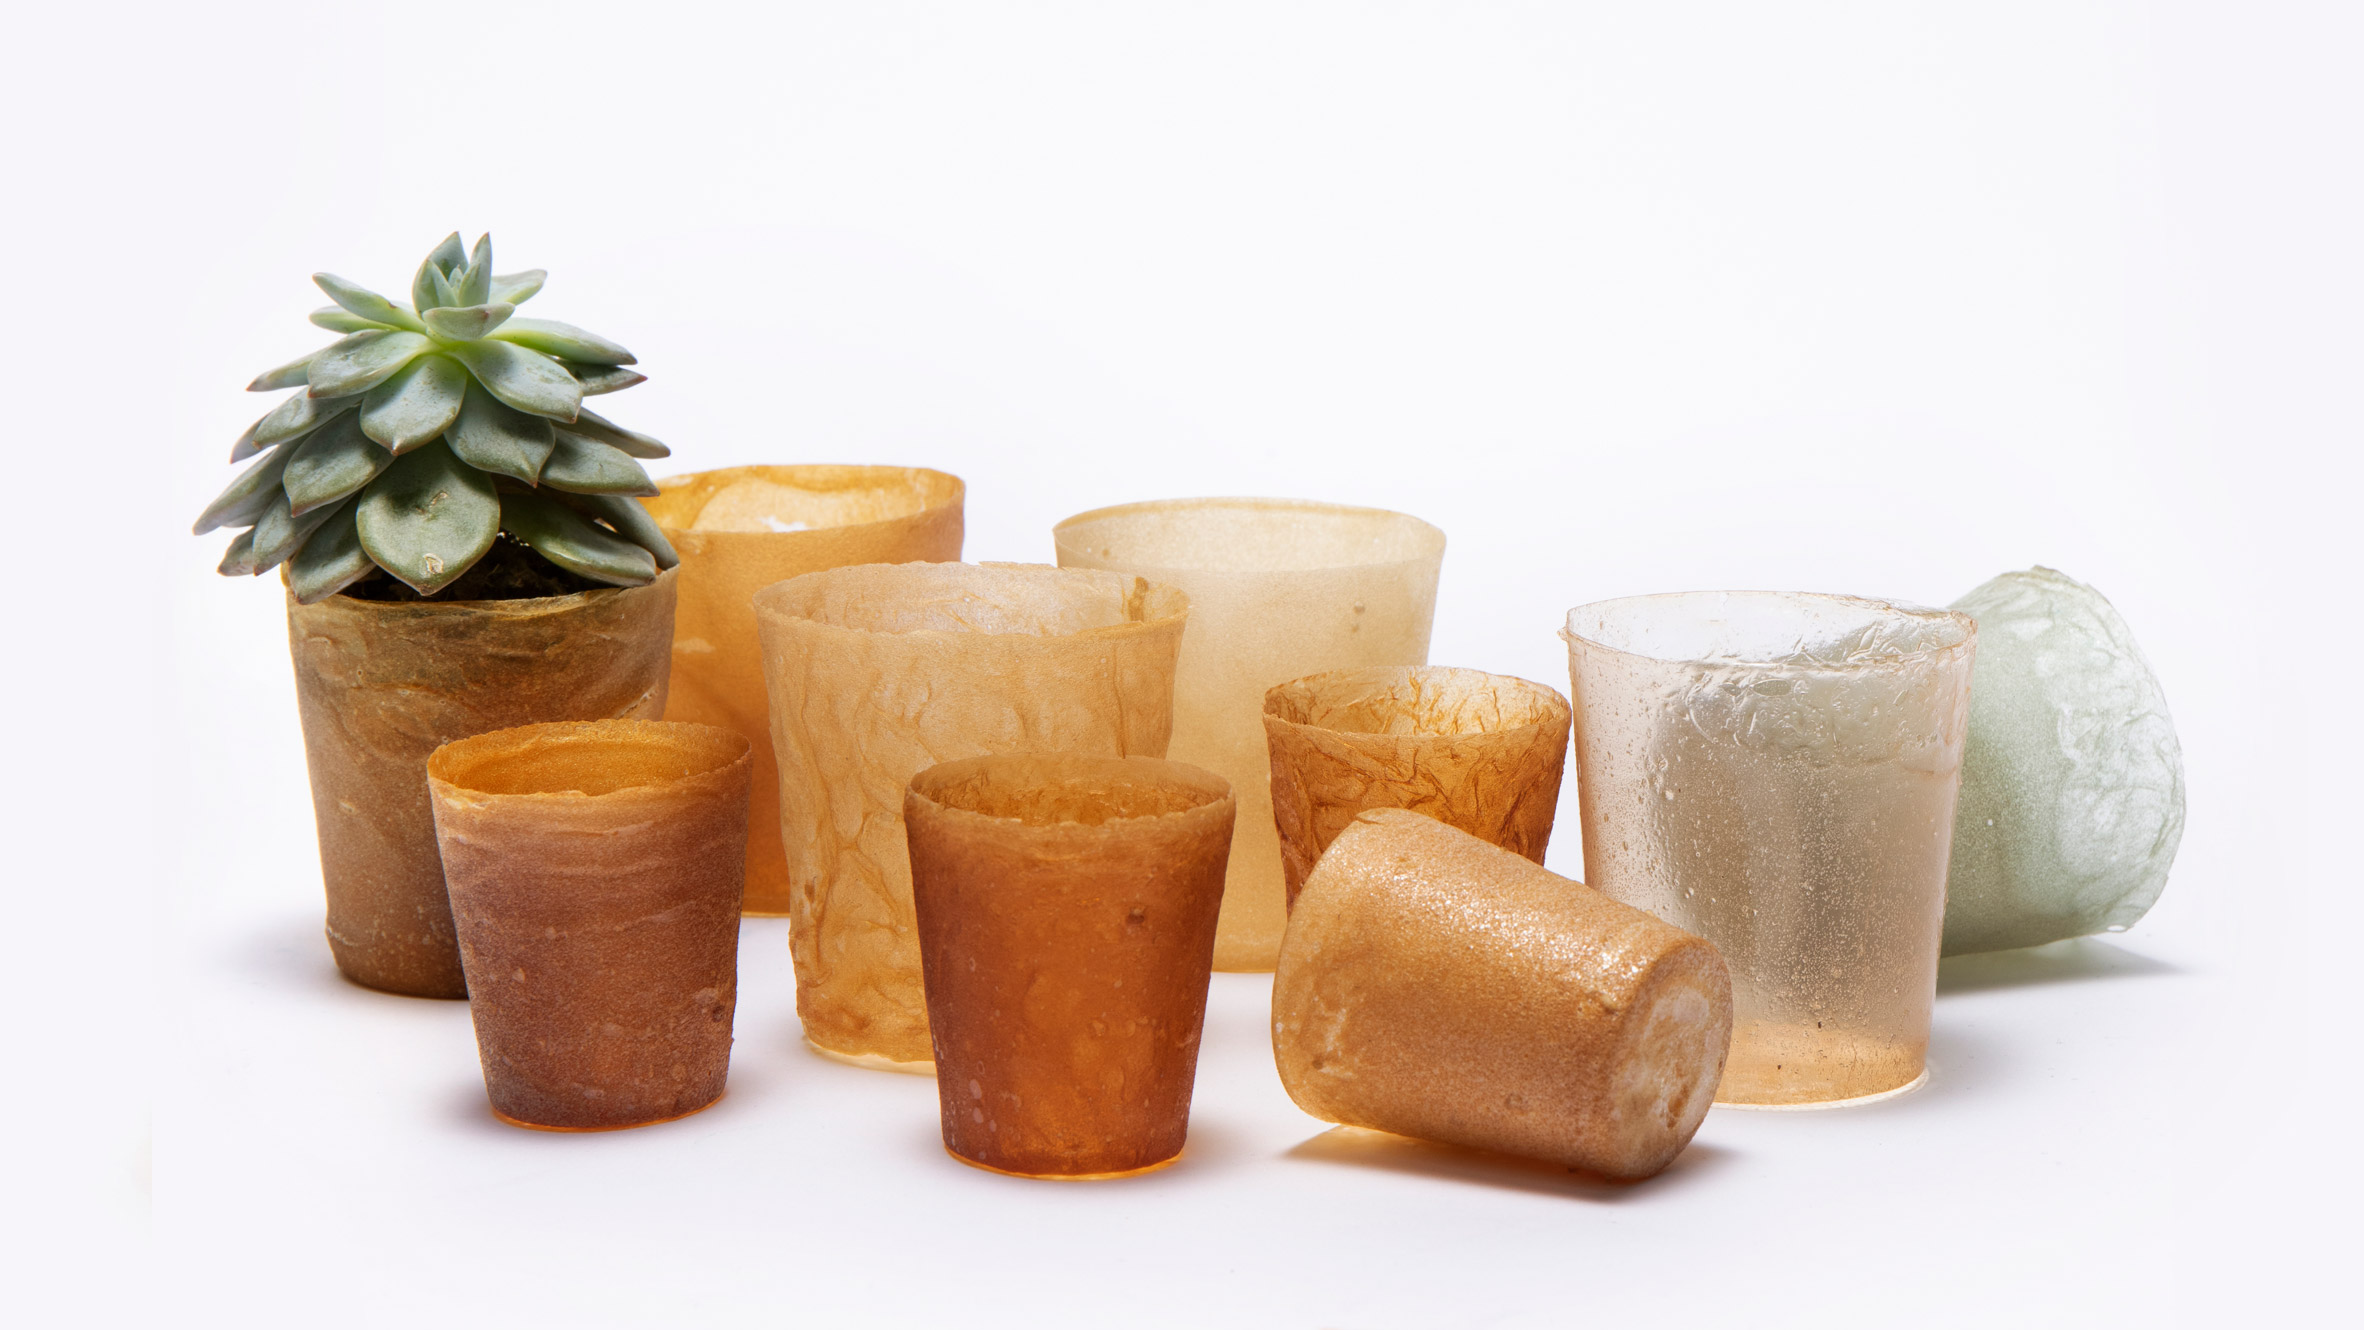 Chitin plant pots by Shellworks